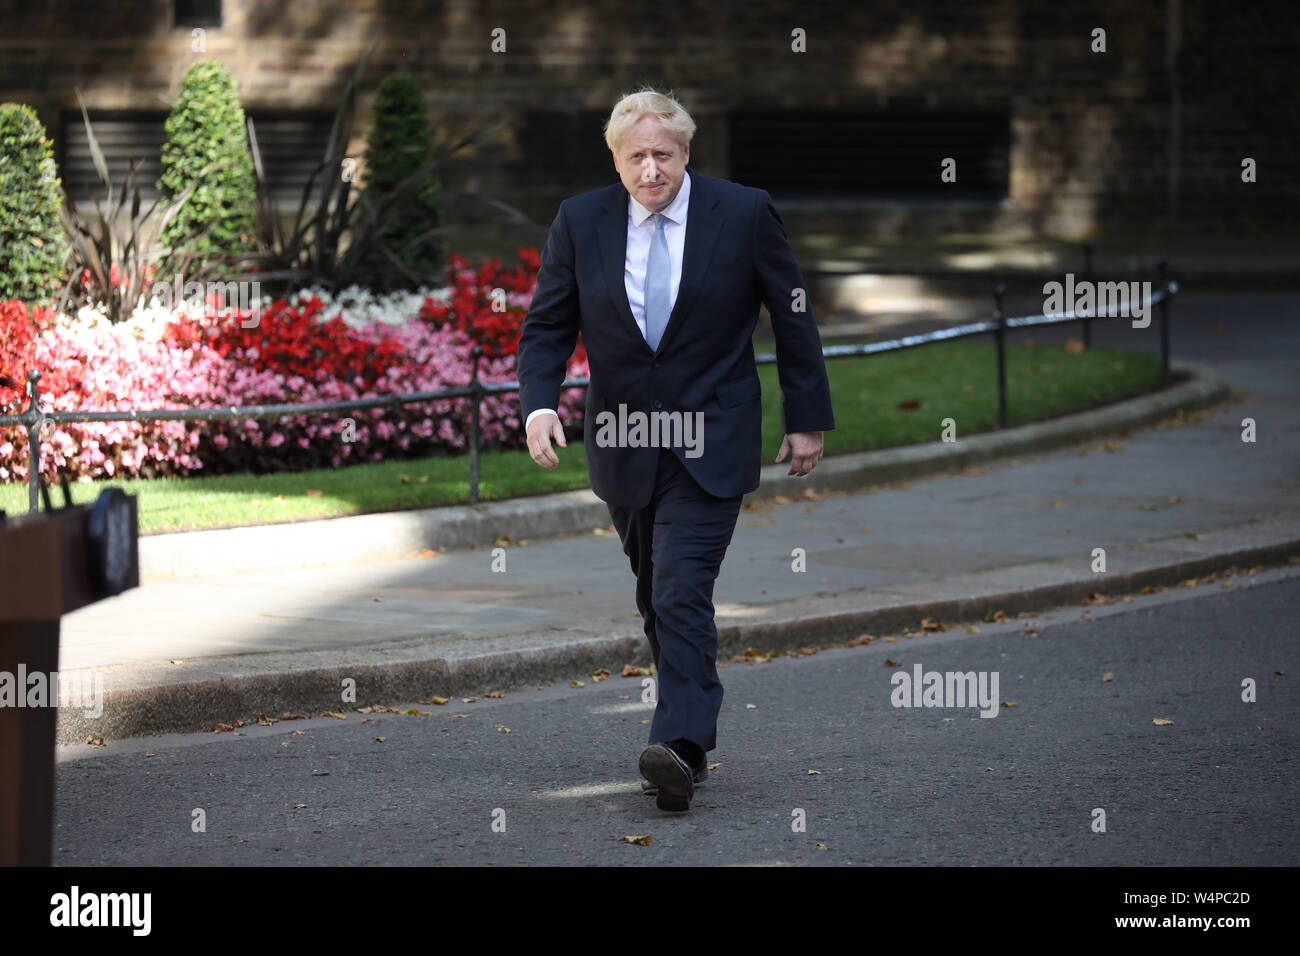 London, UK. 24th July, 2019. The new British Prime Minister Boris Johnson, about to deliver his speech after having an audience with Queen Elizabeth II, who asked him to form a new government after Theresa May stepped down as Prime Minister. Johnson is pictured as he takes over as the new Prime Minister at Number 10 Downing Street, London, on July 24, 2019 Credit: Paul Marriott/Alamy Live News Stock Photo